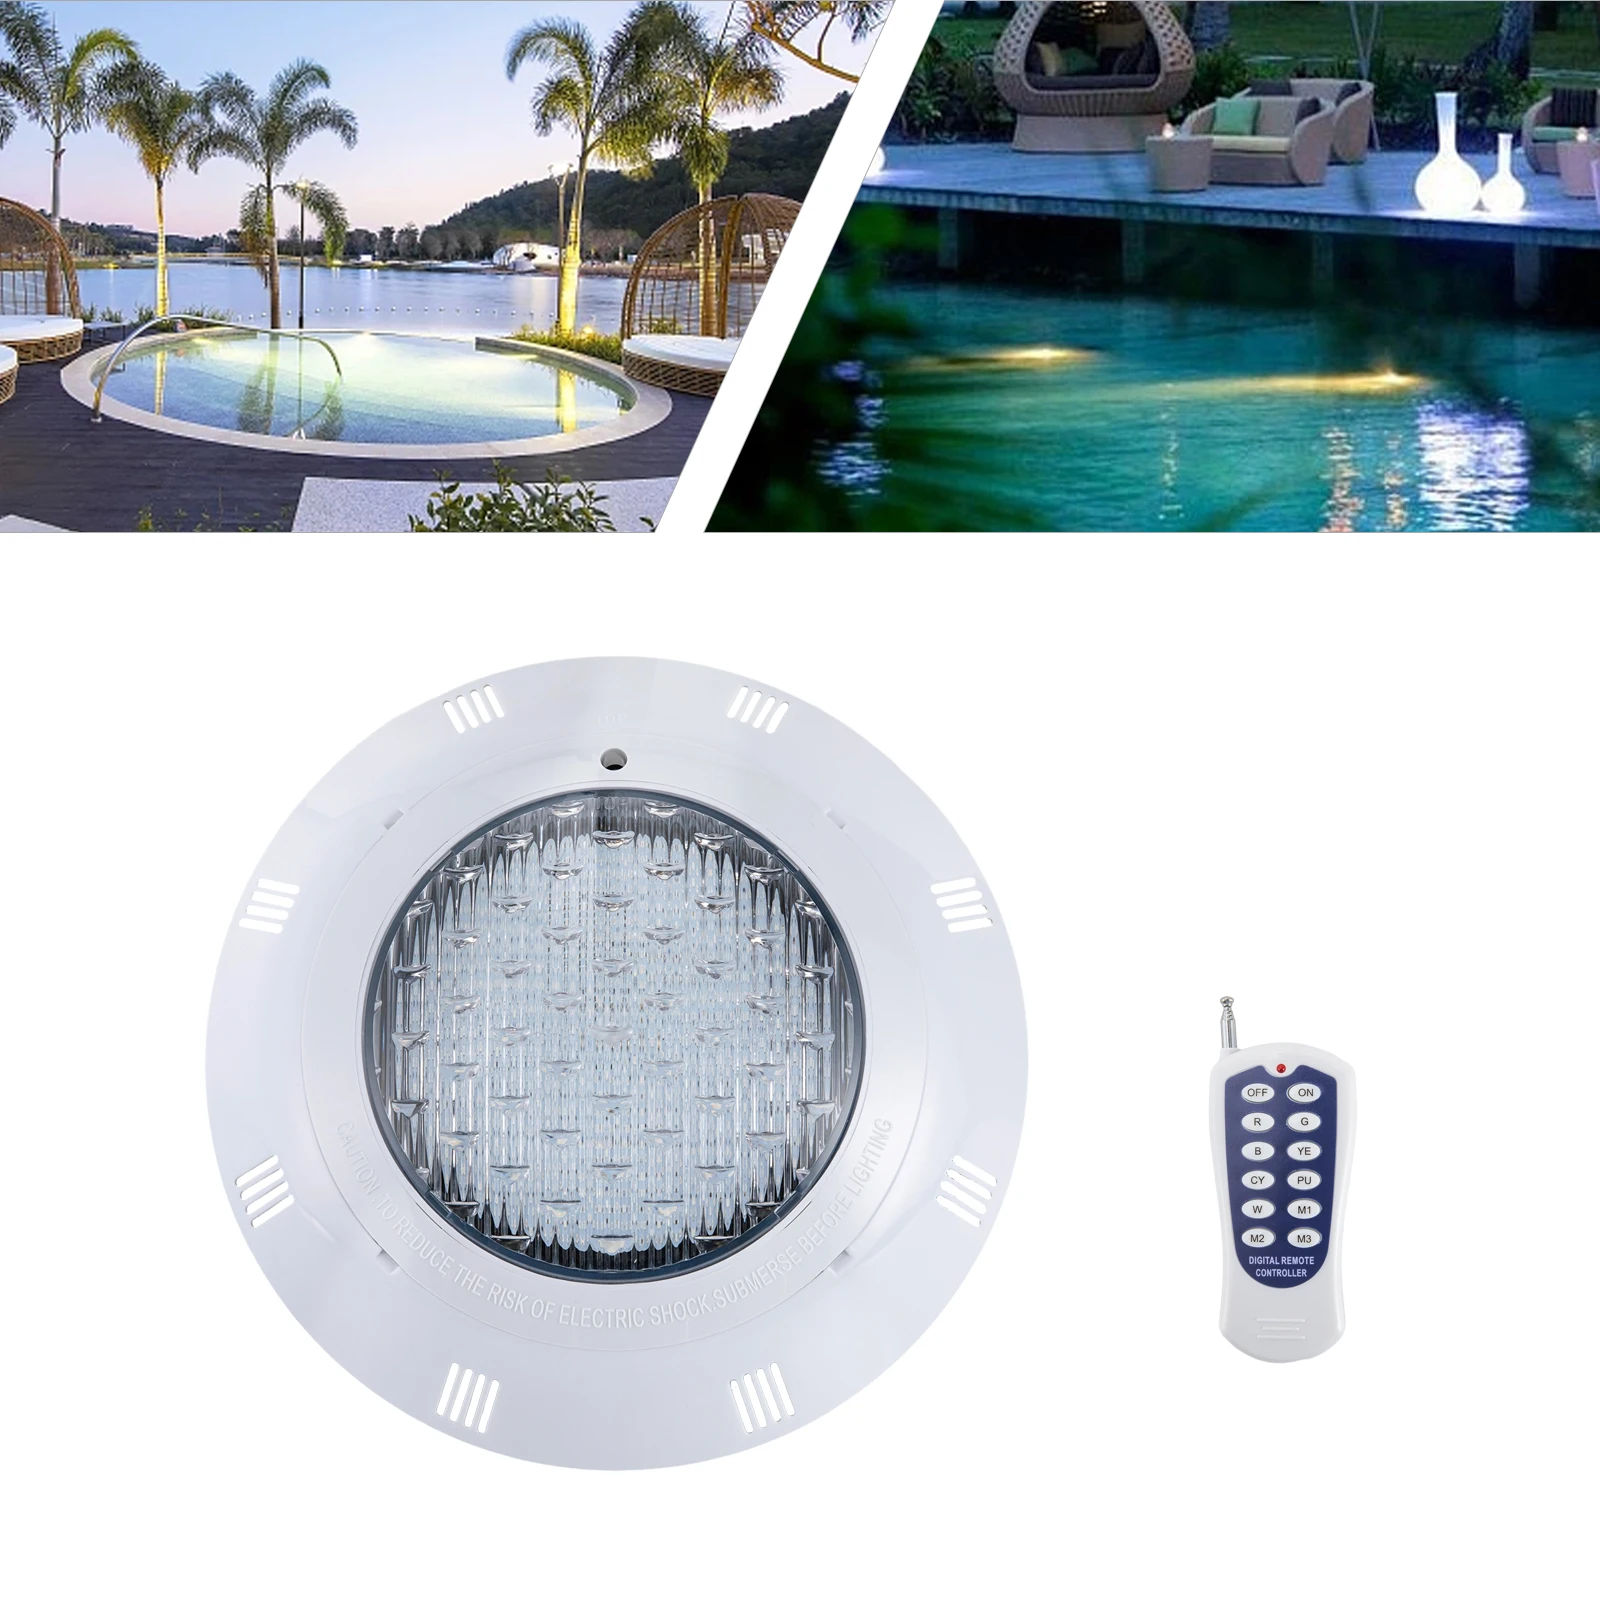 LED Pool Light, Swimming Pool Light with Remote Controller RGB Multi Color Outdoor LED Underwater AC12V IP68 Waterproof Lamp wifi tuya door access control keypad ip68 waterproof rfid keyboard controller reader touch door opener app remote unlock wg26 34